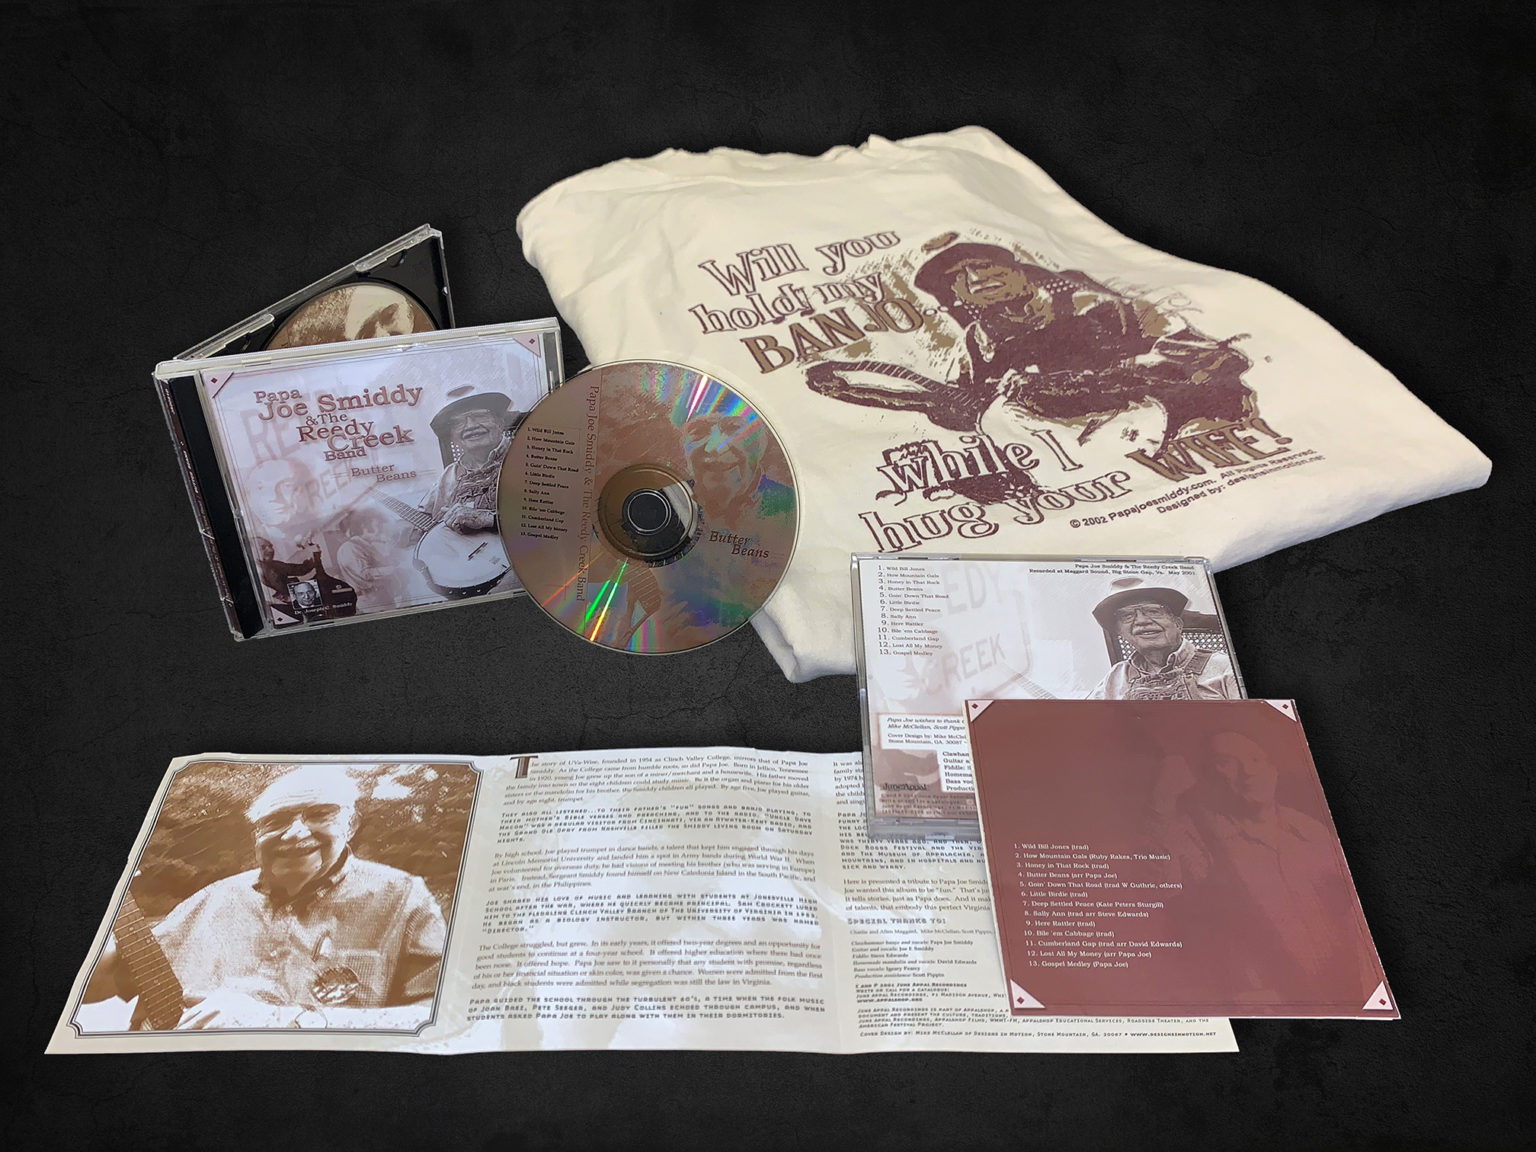 Papa Joe Smiddy Commemorative CD & T-Shirt • Designed by: Designs In Motion, Inc.